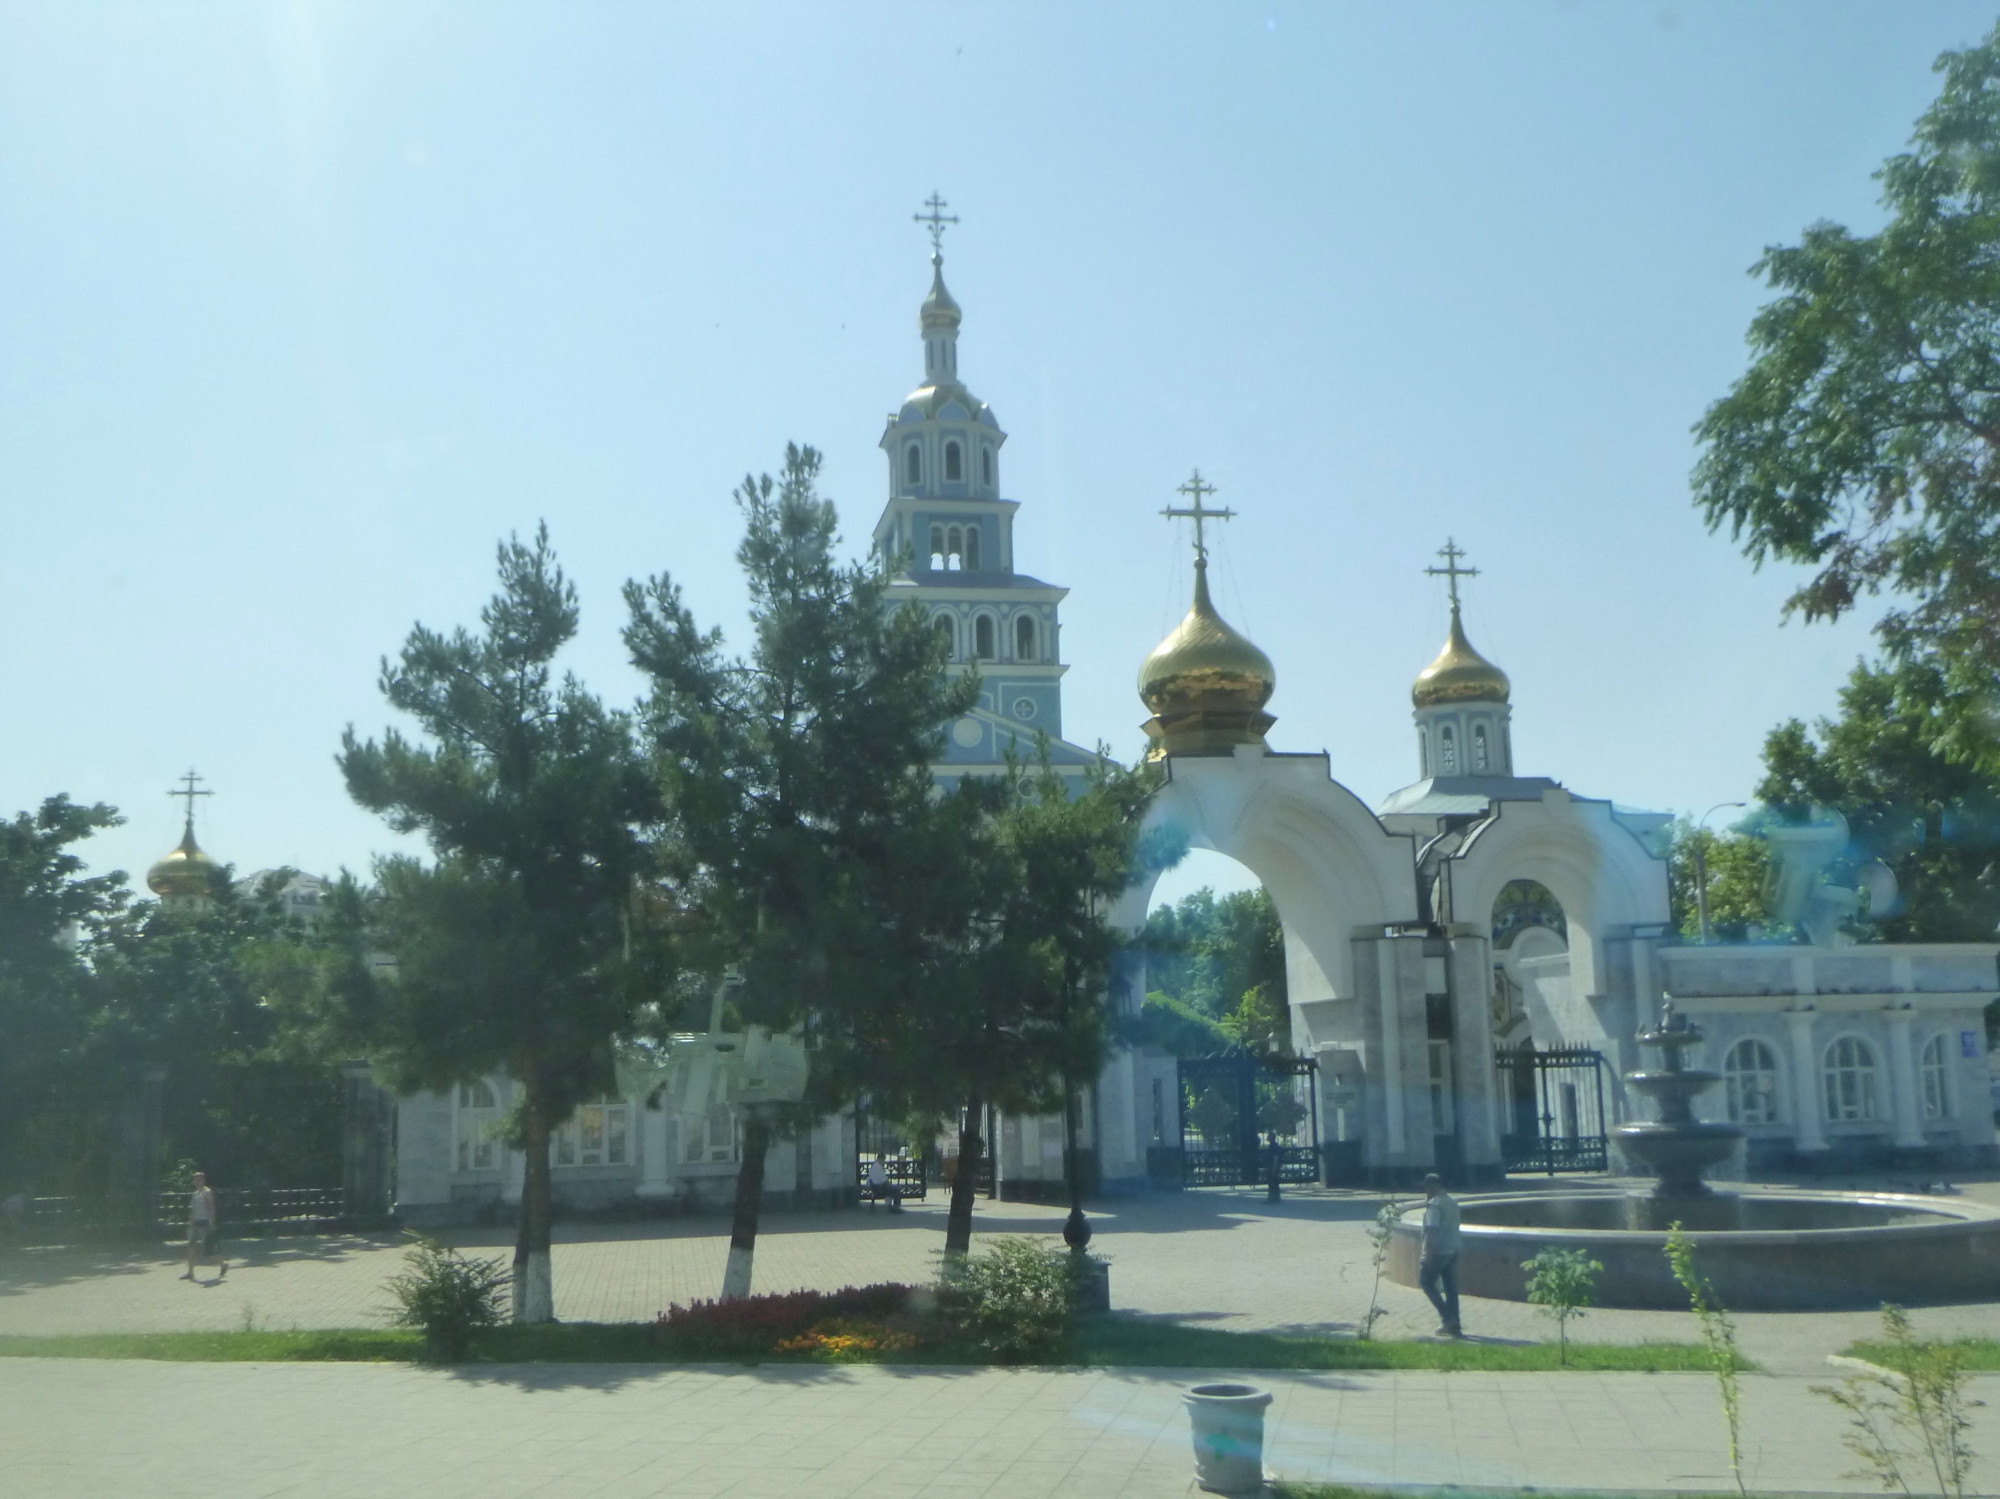 Holy Assumption Cathedral Church<br/> <br/>
Russian Orthodox church